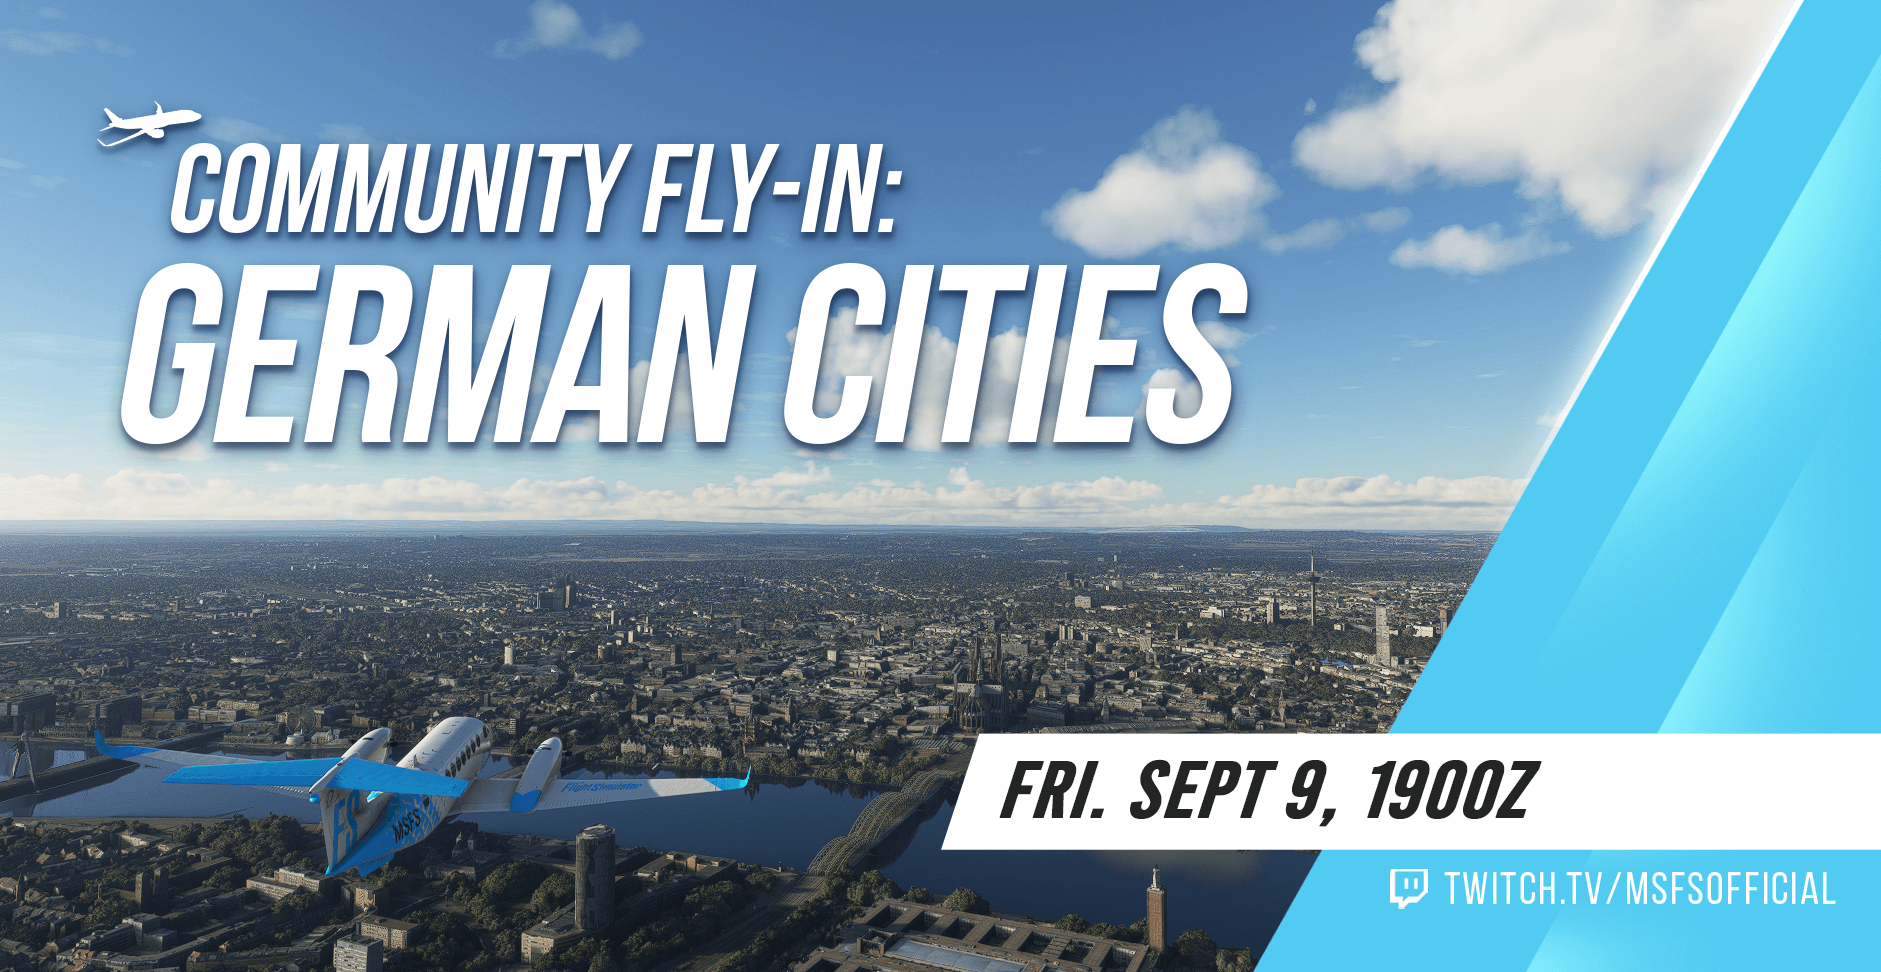 Community Fly-in German cities, sept. 9 at 1900z